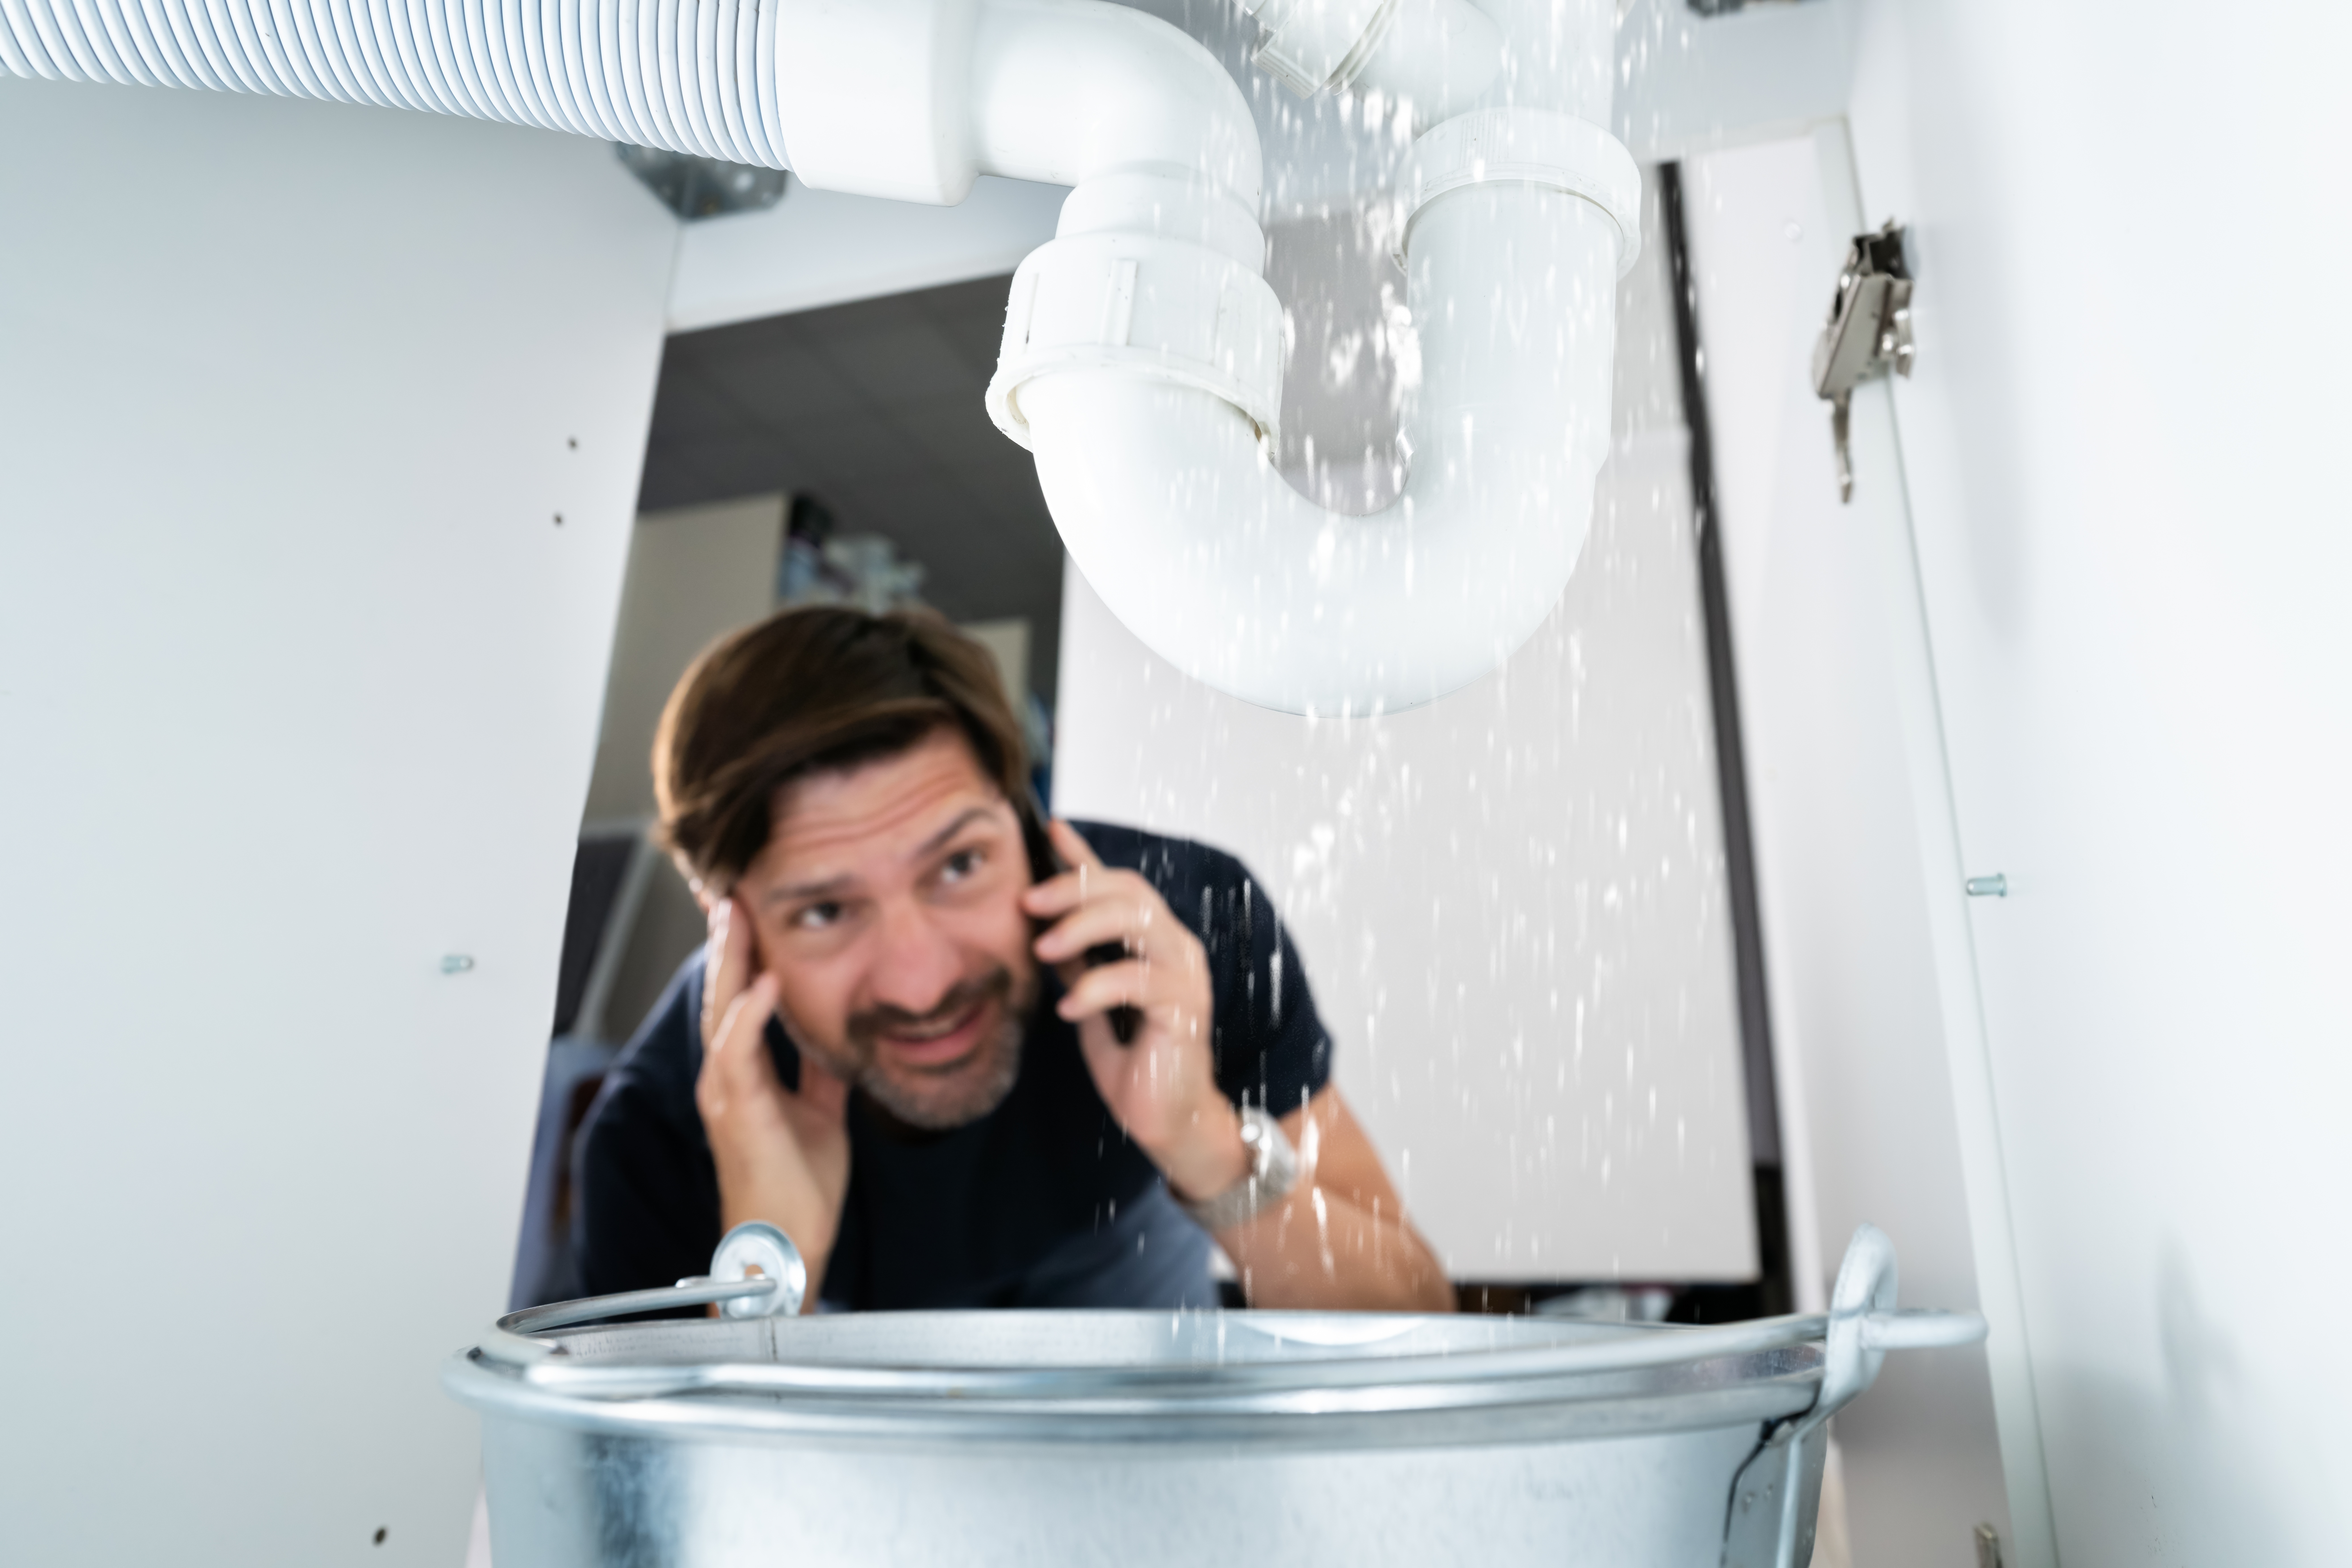 What You Should Do While You Wait For an Emergency Plumber to Arrive